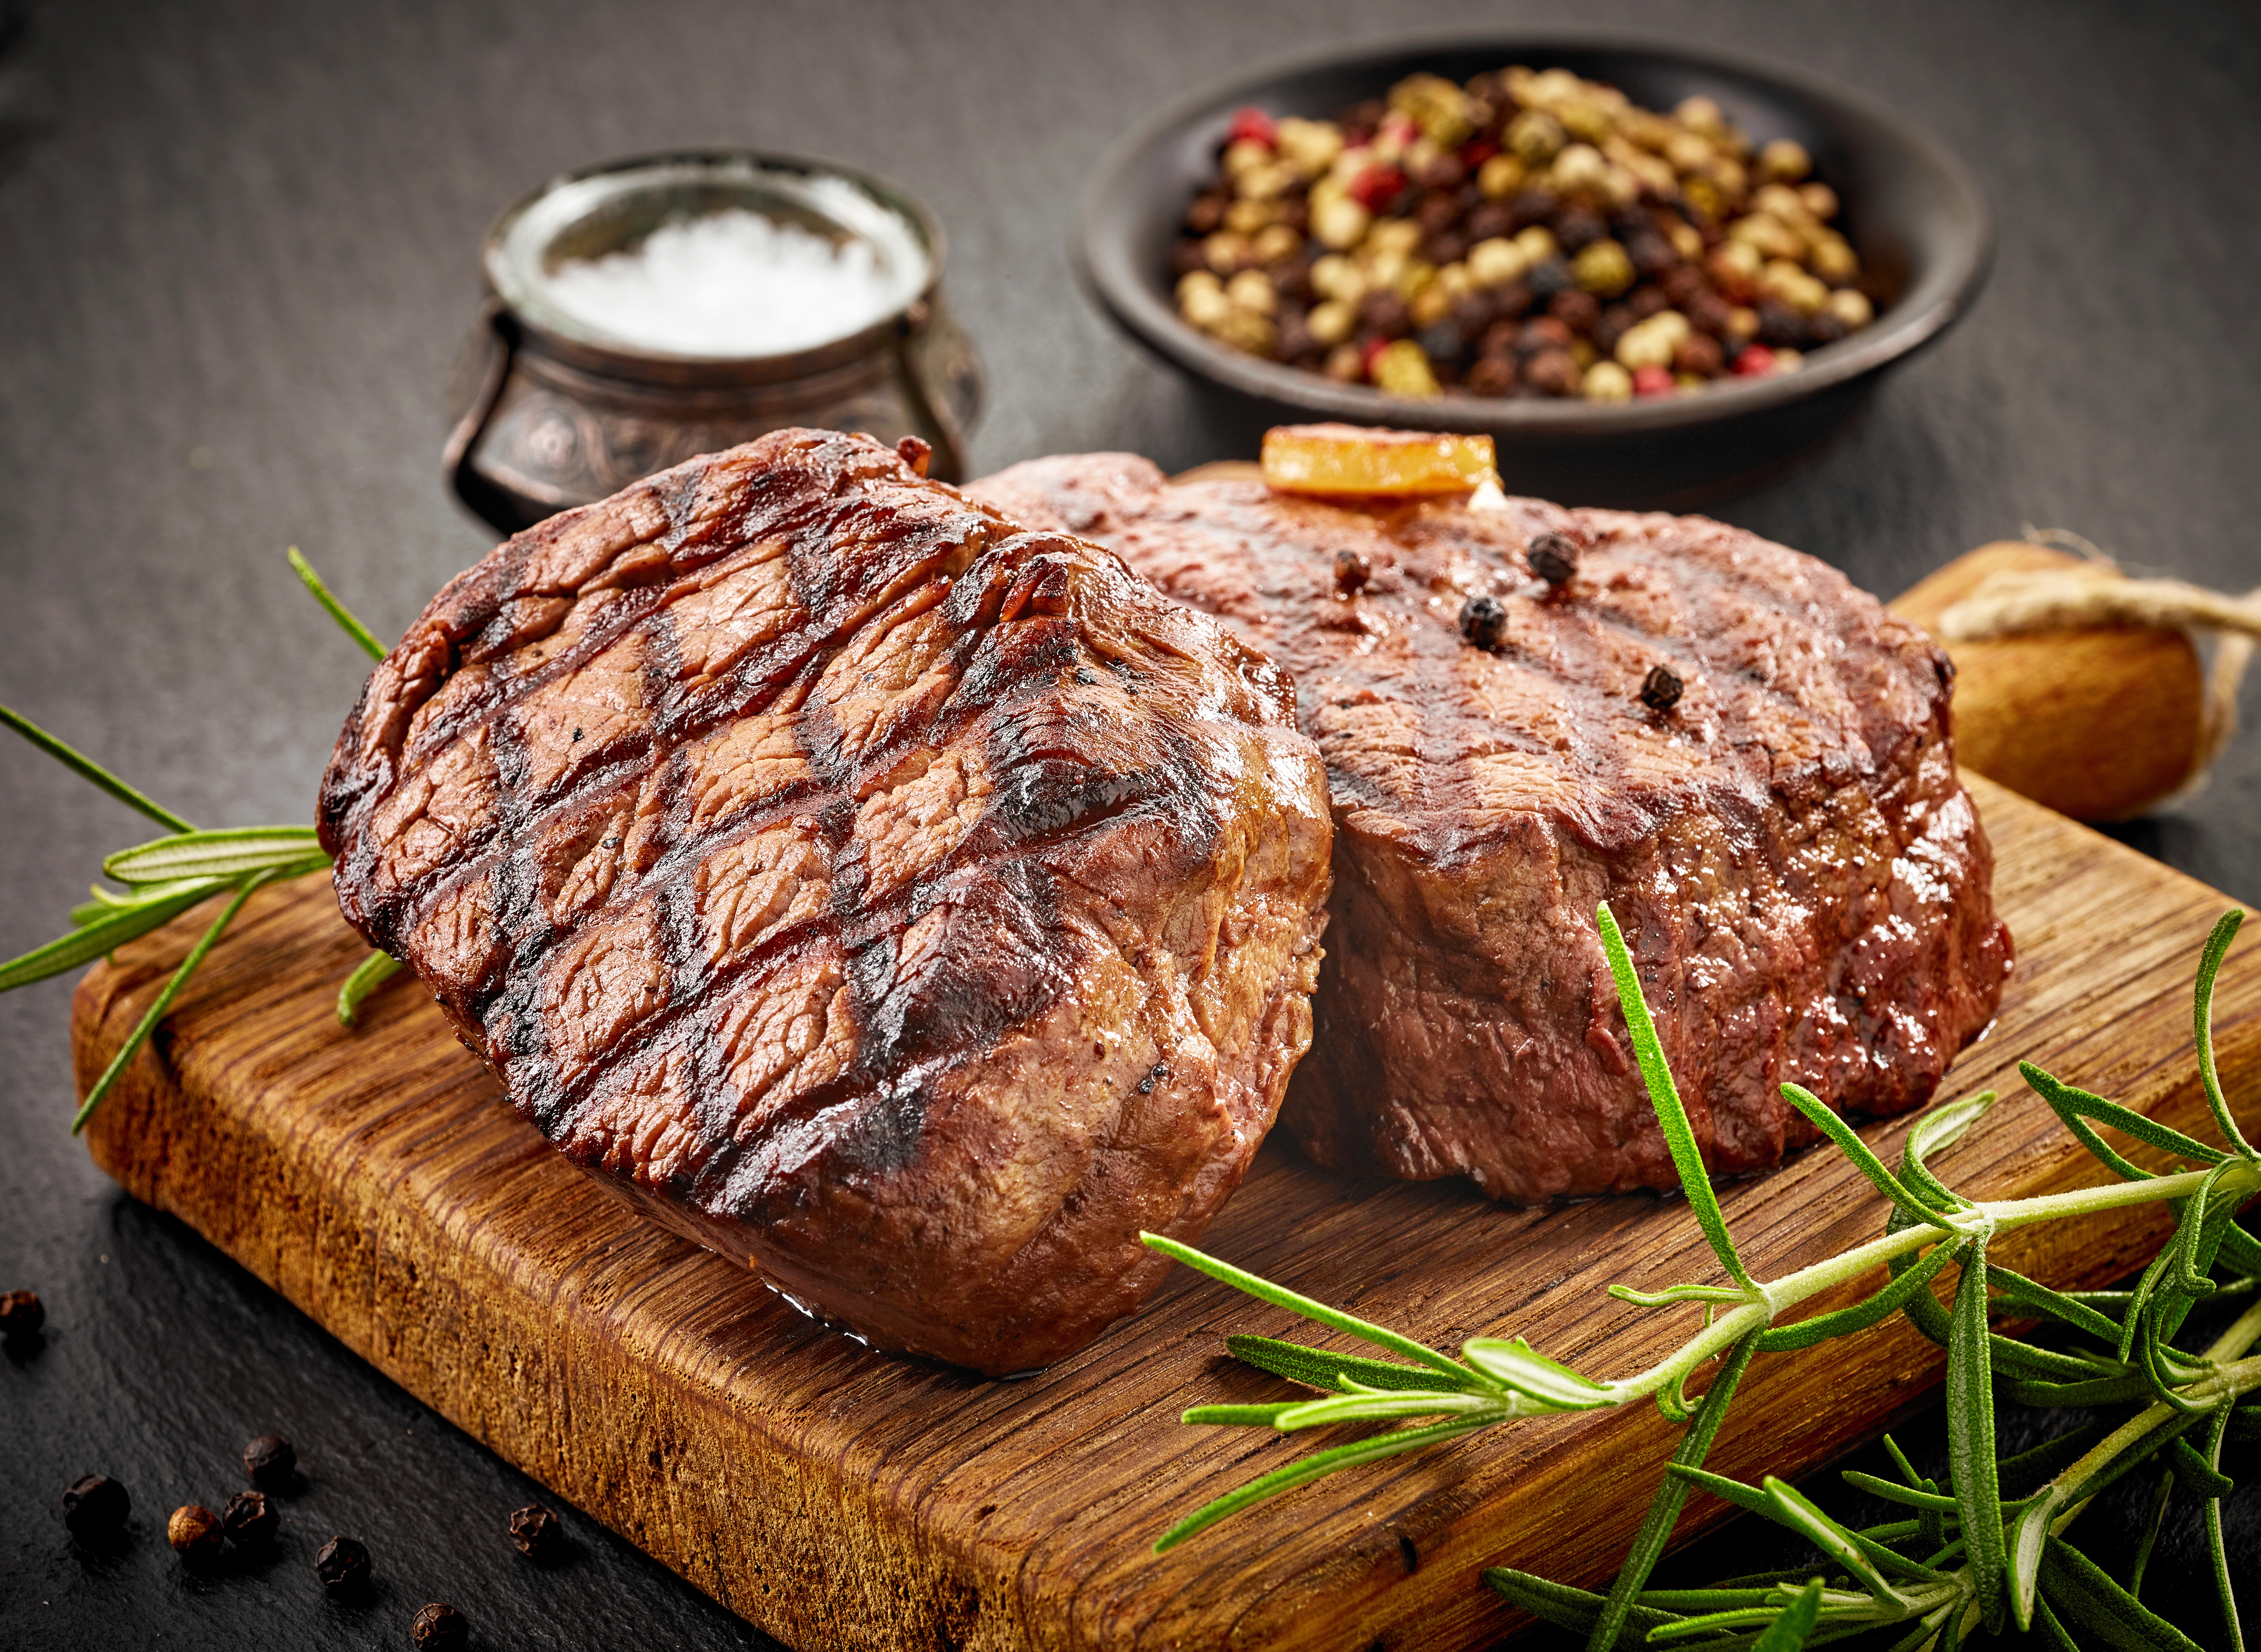 Beef stakes | Source: Shutterstock